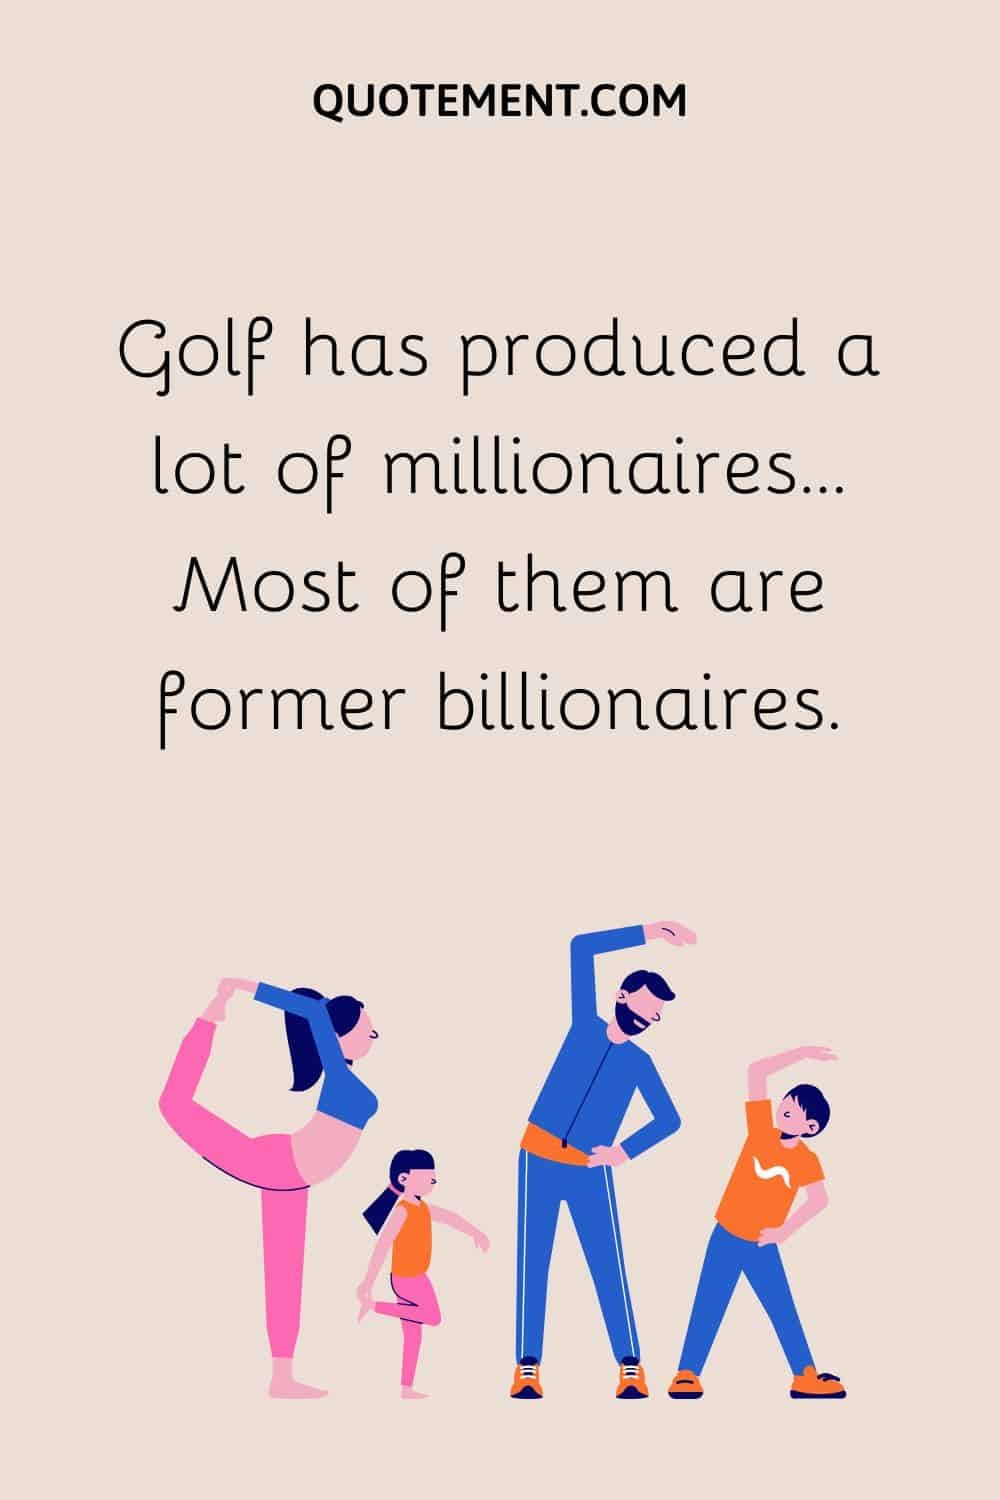 Golf has produced a lot of millionaires